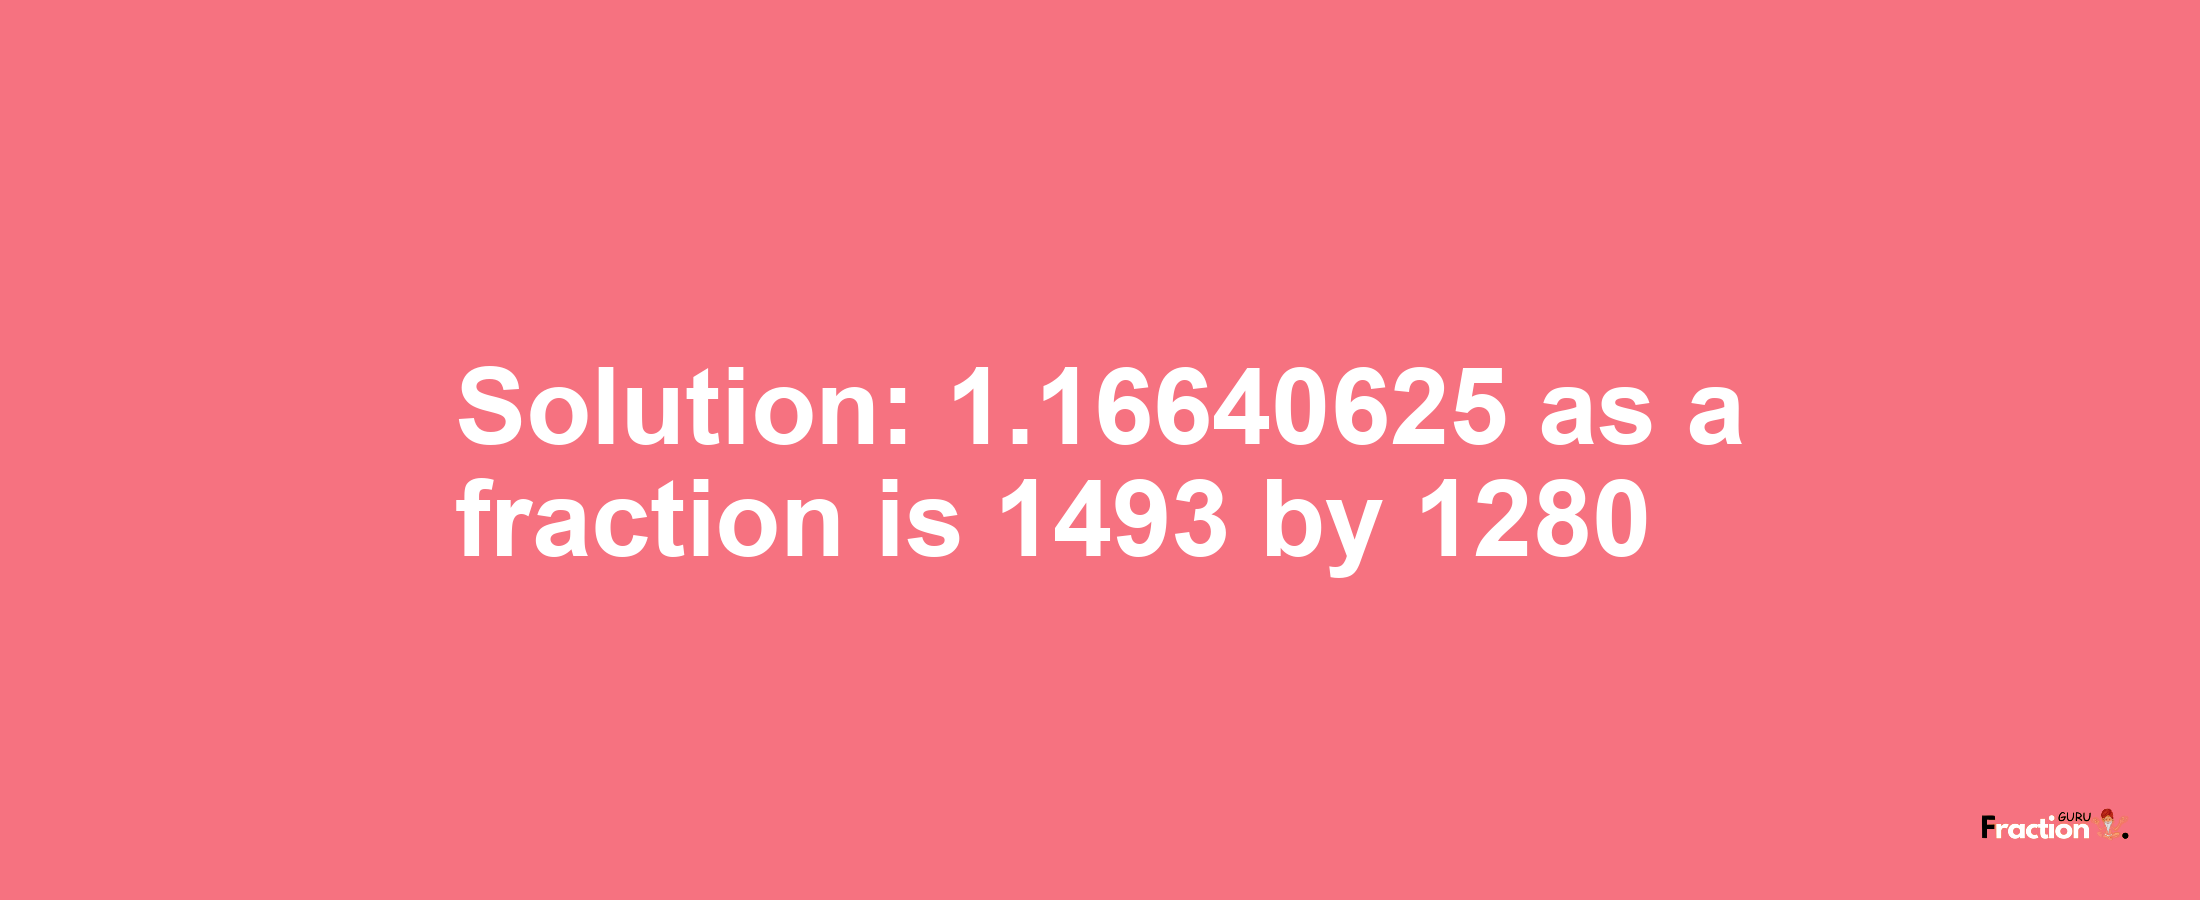 Solution:1.16640625 as a fraction is 1493/1280